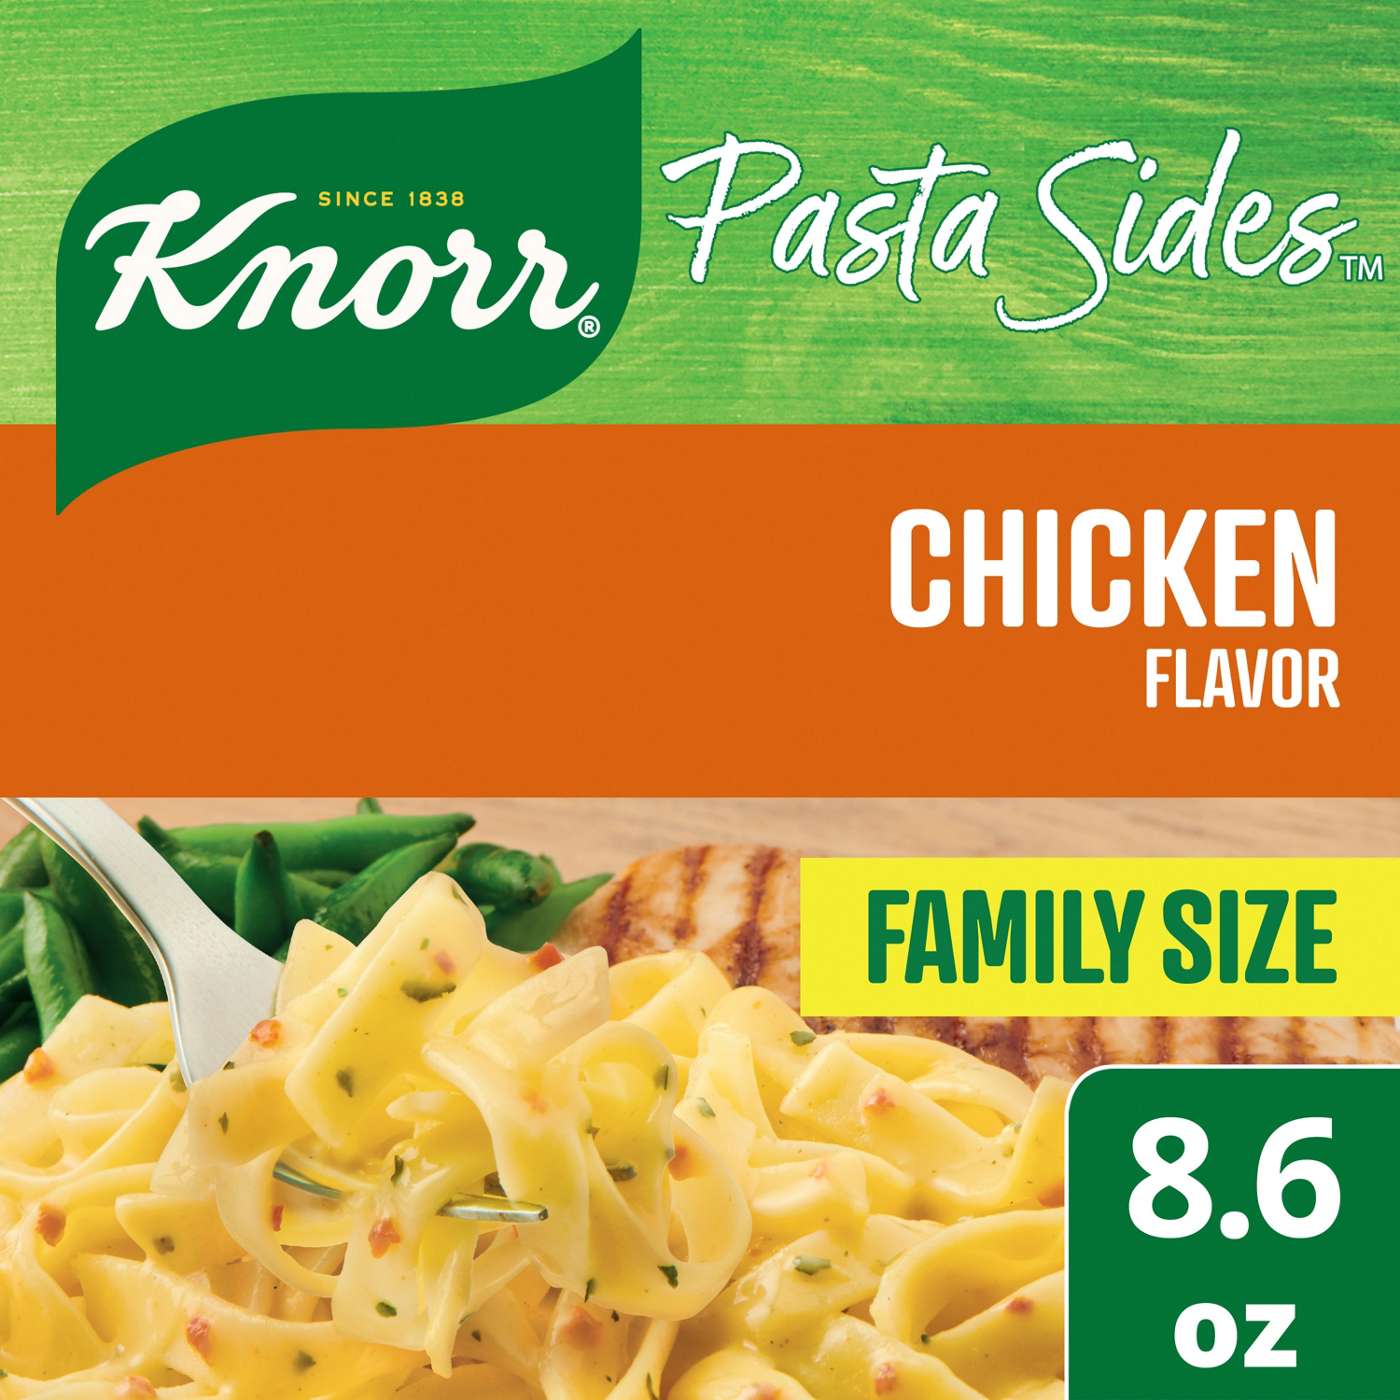 Knorr Pasta Sides Chicken Flavor Fettuccine Family Size; image 2 of 3